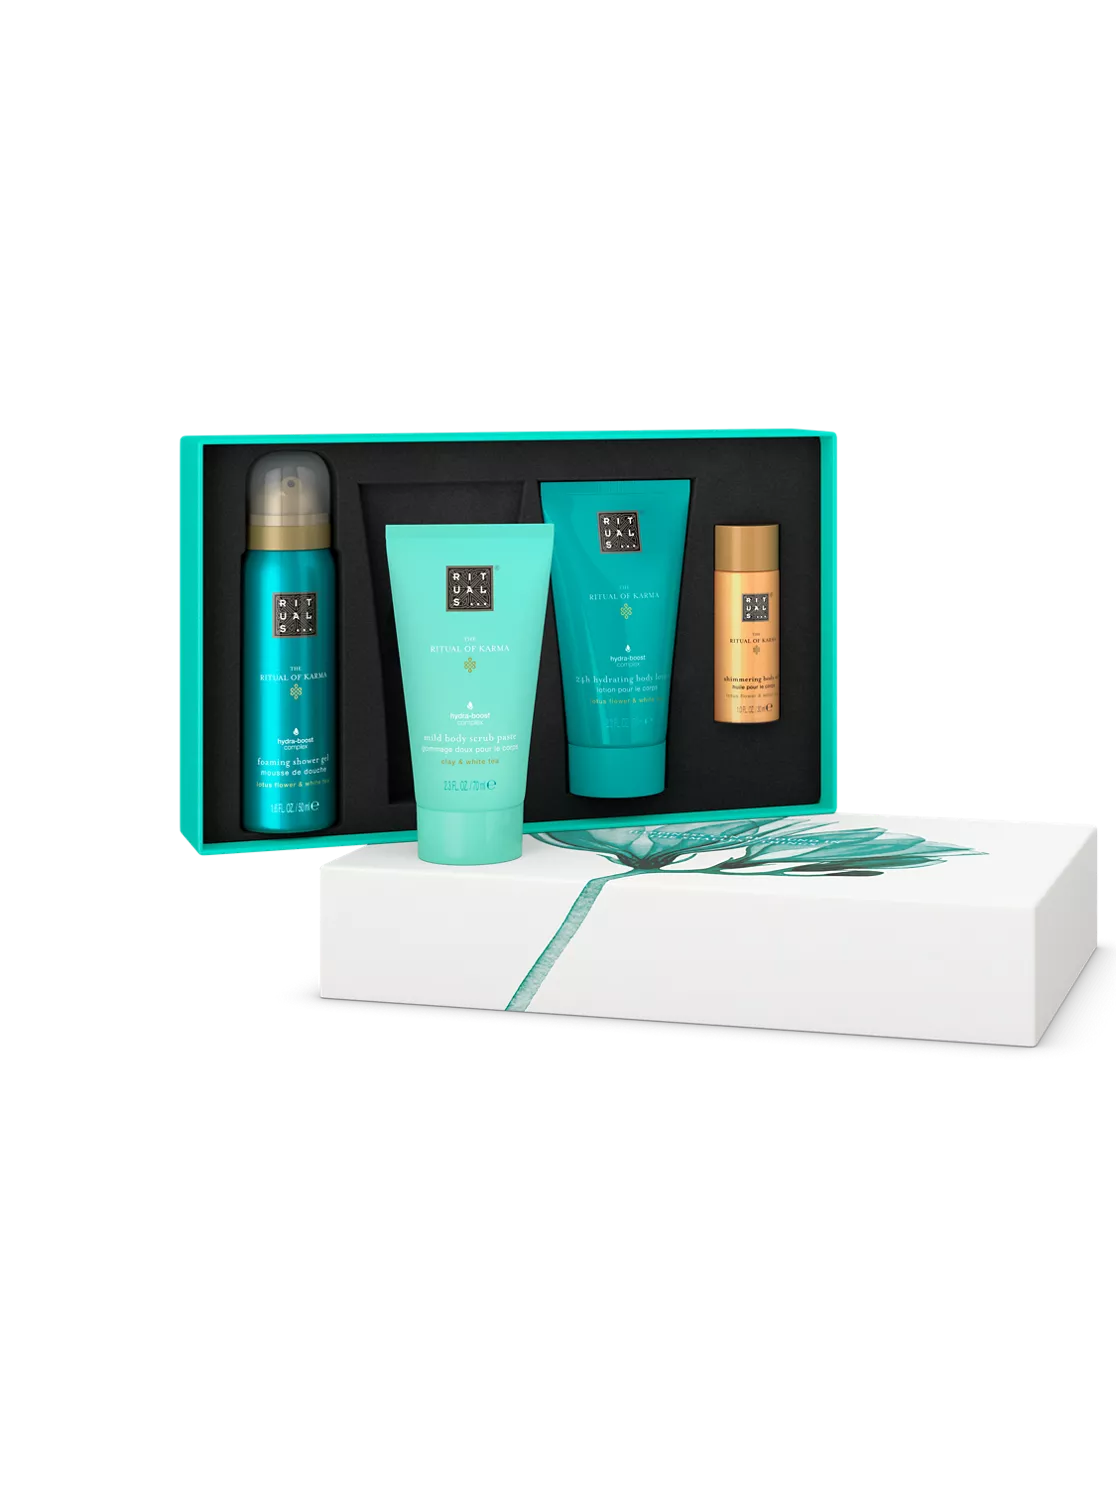 https://rituals.scene7.com/is/image/rituals/1116614-rituals-karma-giftset-s-pack-open-inlay:3-by-4?fmt=webp-alpha&hei=1488&resMode=sharp2&wid=1116